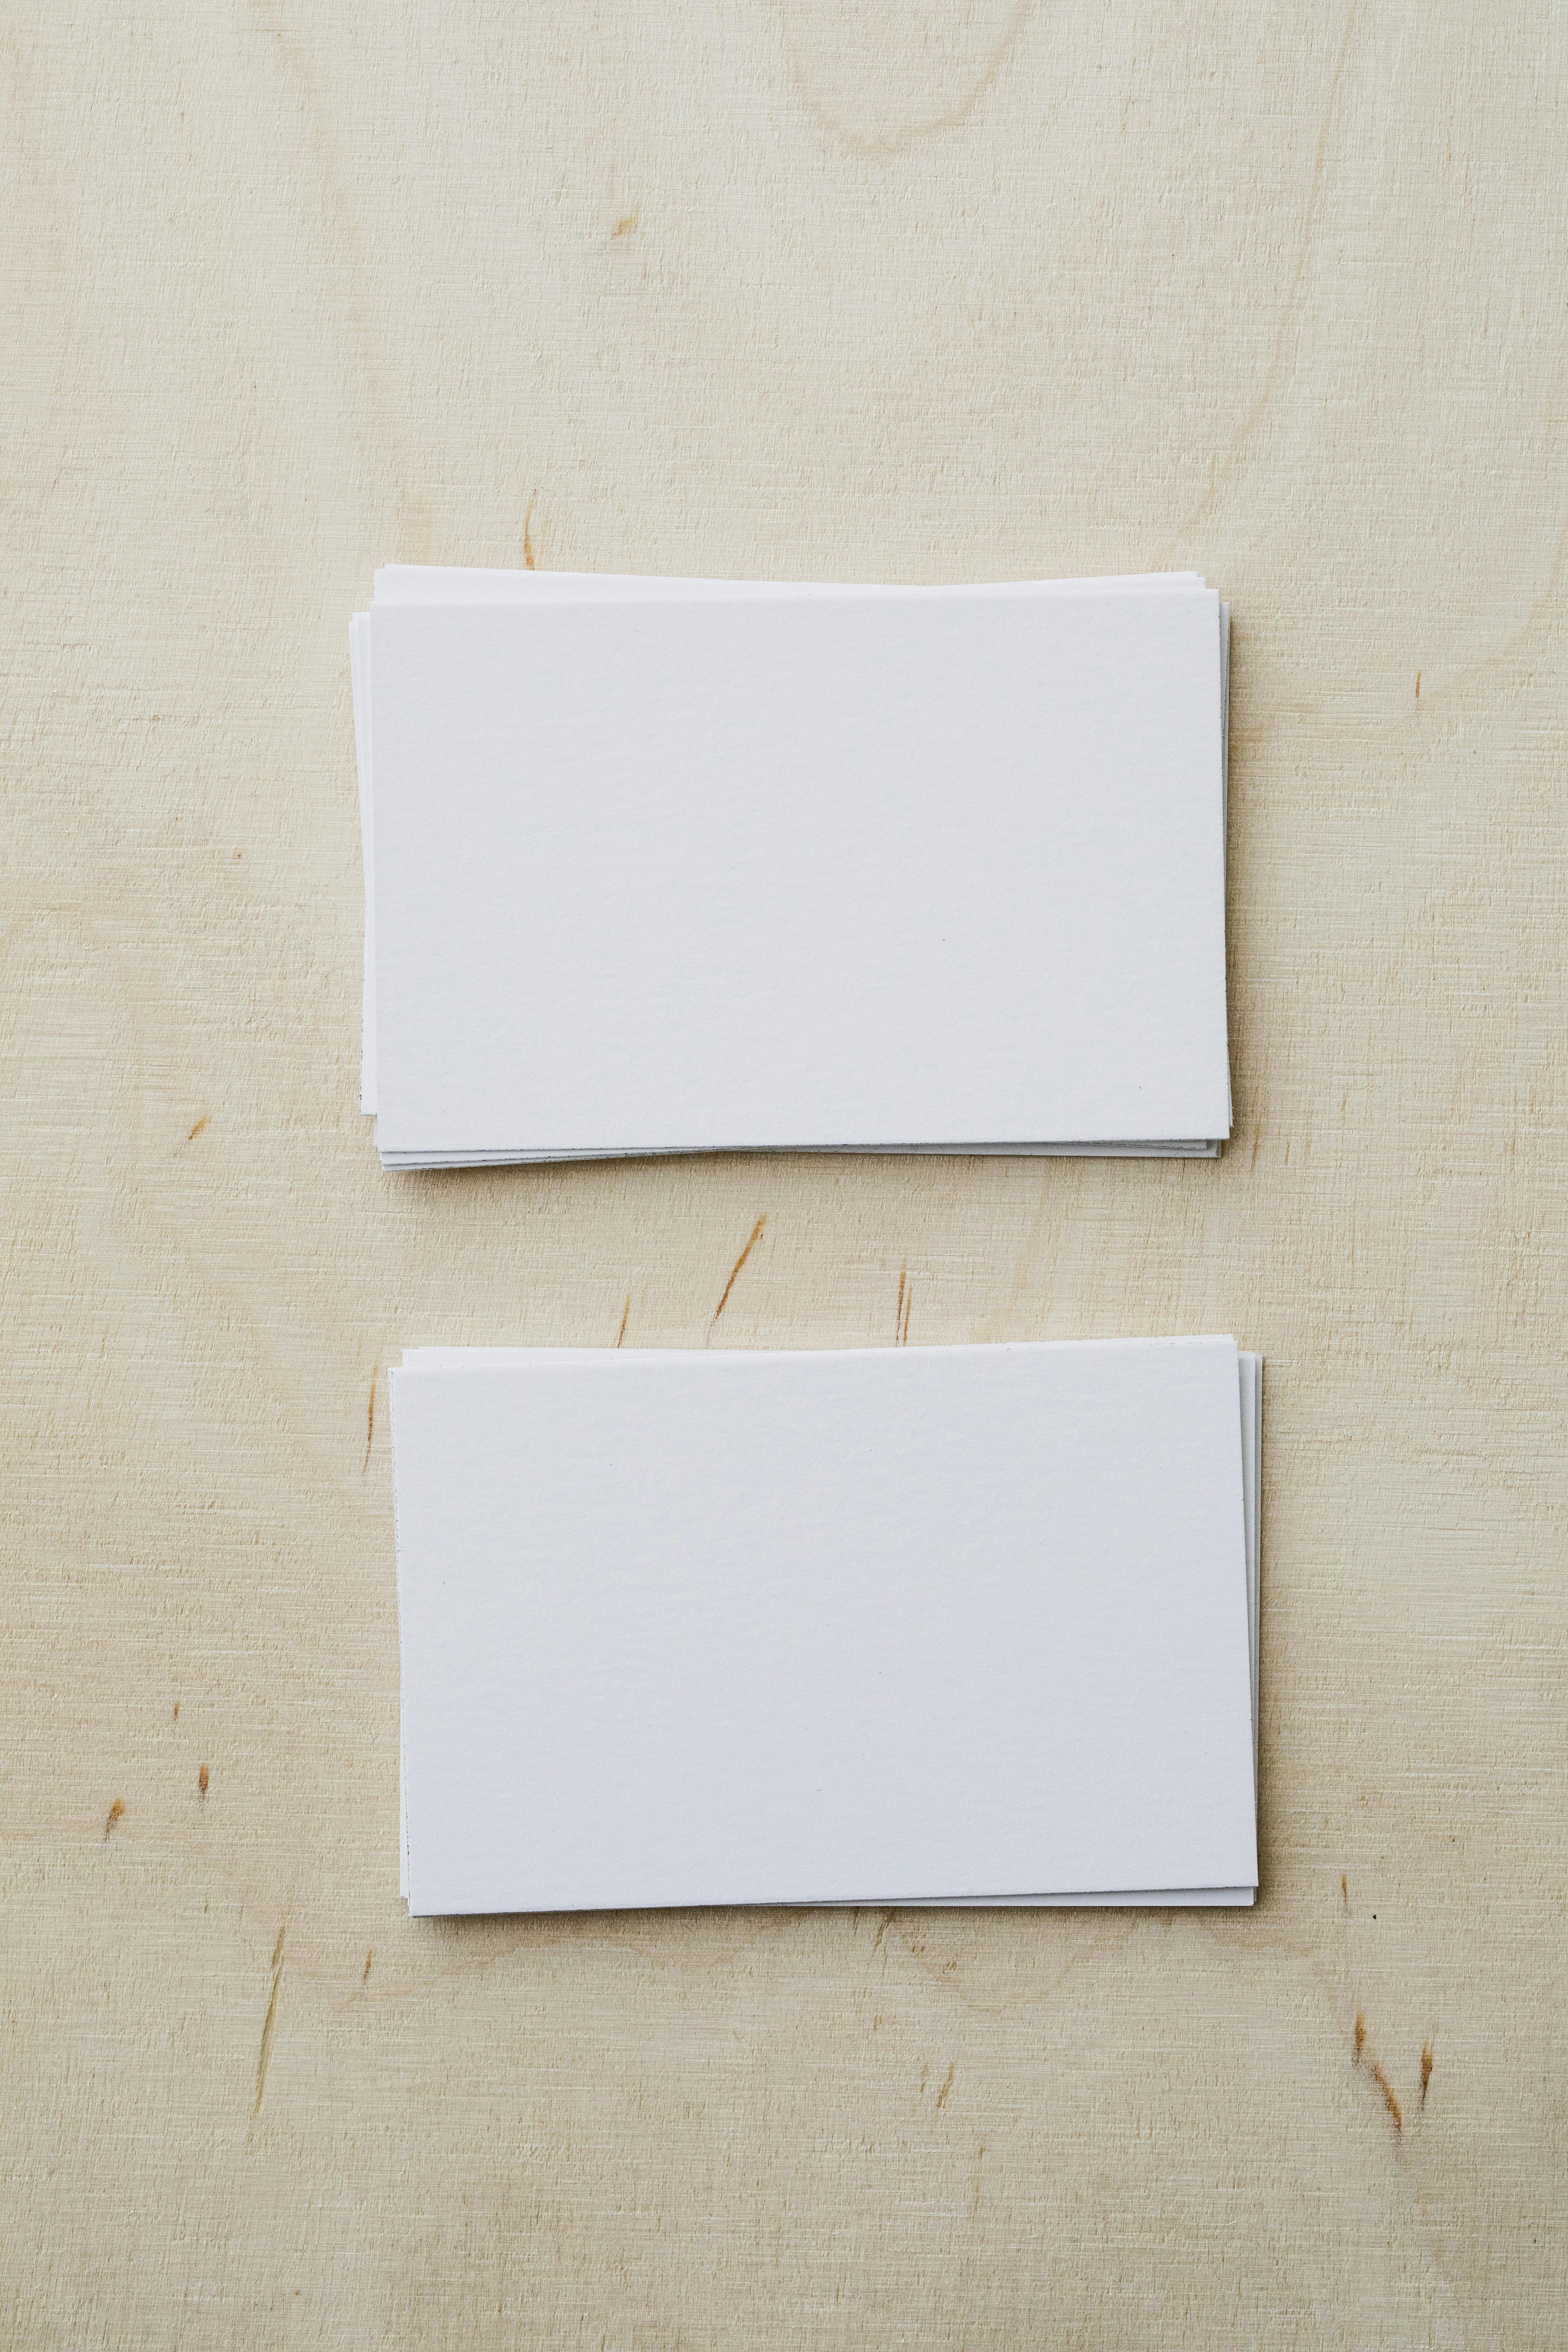 stacks of blank white visiting cards on table